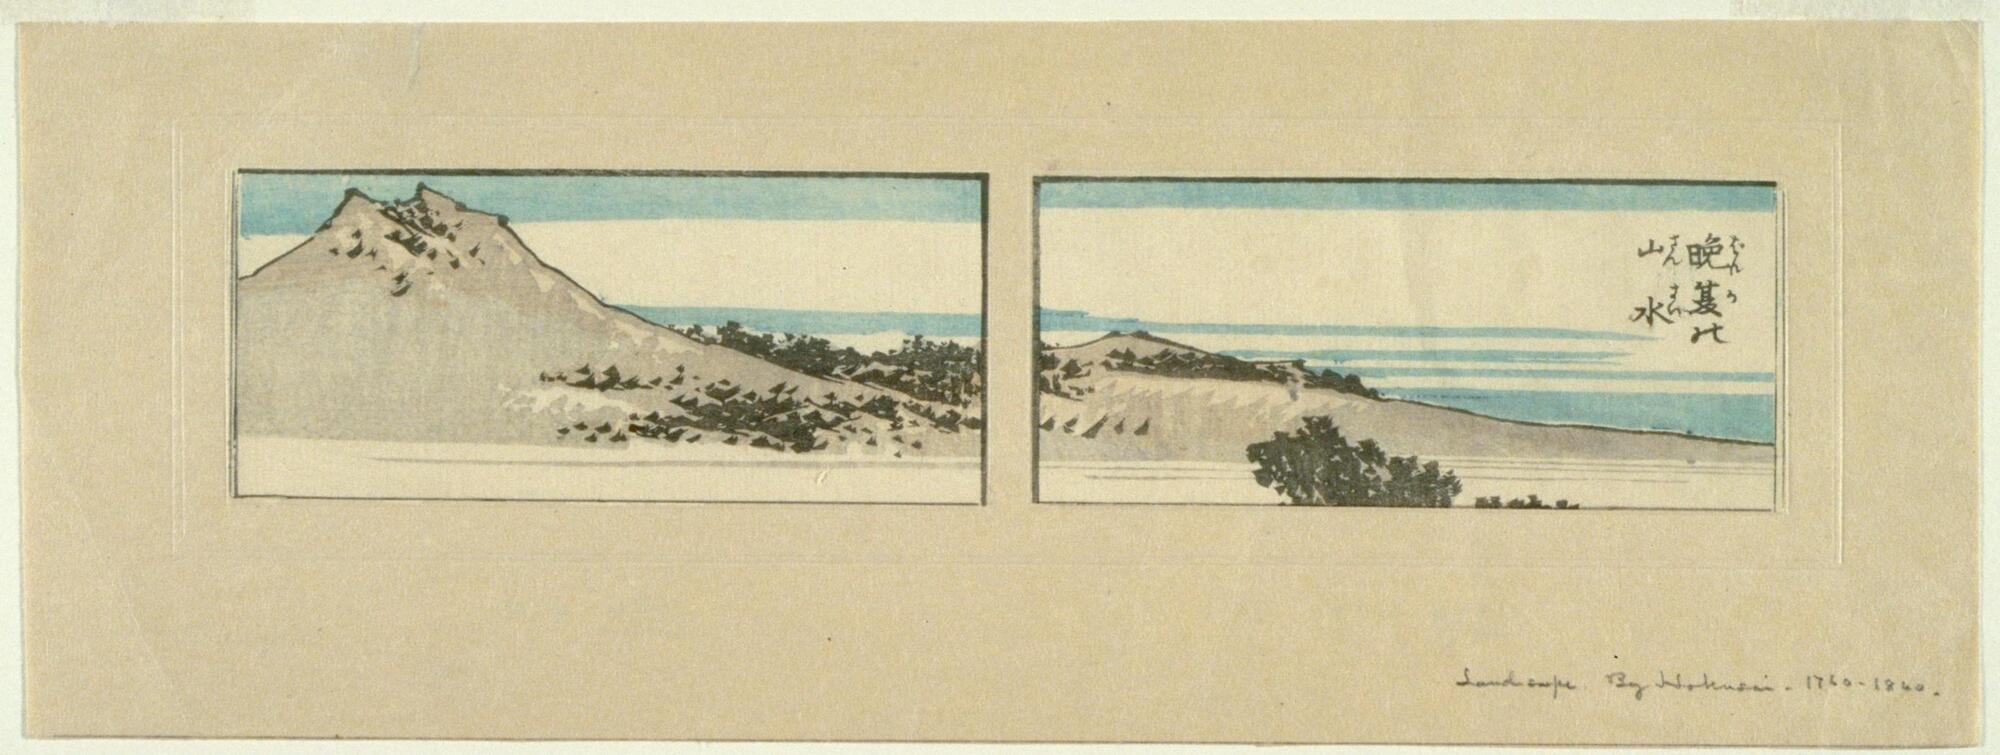 The print features a mountain, the edge of which creates a diagonal. A few plants are shown at the base of the mountain, and behind the mountain the sky is depicted with the colors of blue and white. The artist inscribed several calligraphic characters on the upper right-hand corner, which says "a scenery of the mountain and the water in the evening. (?)"